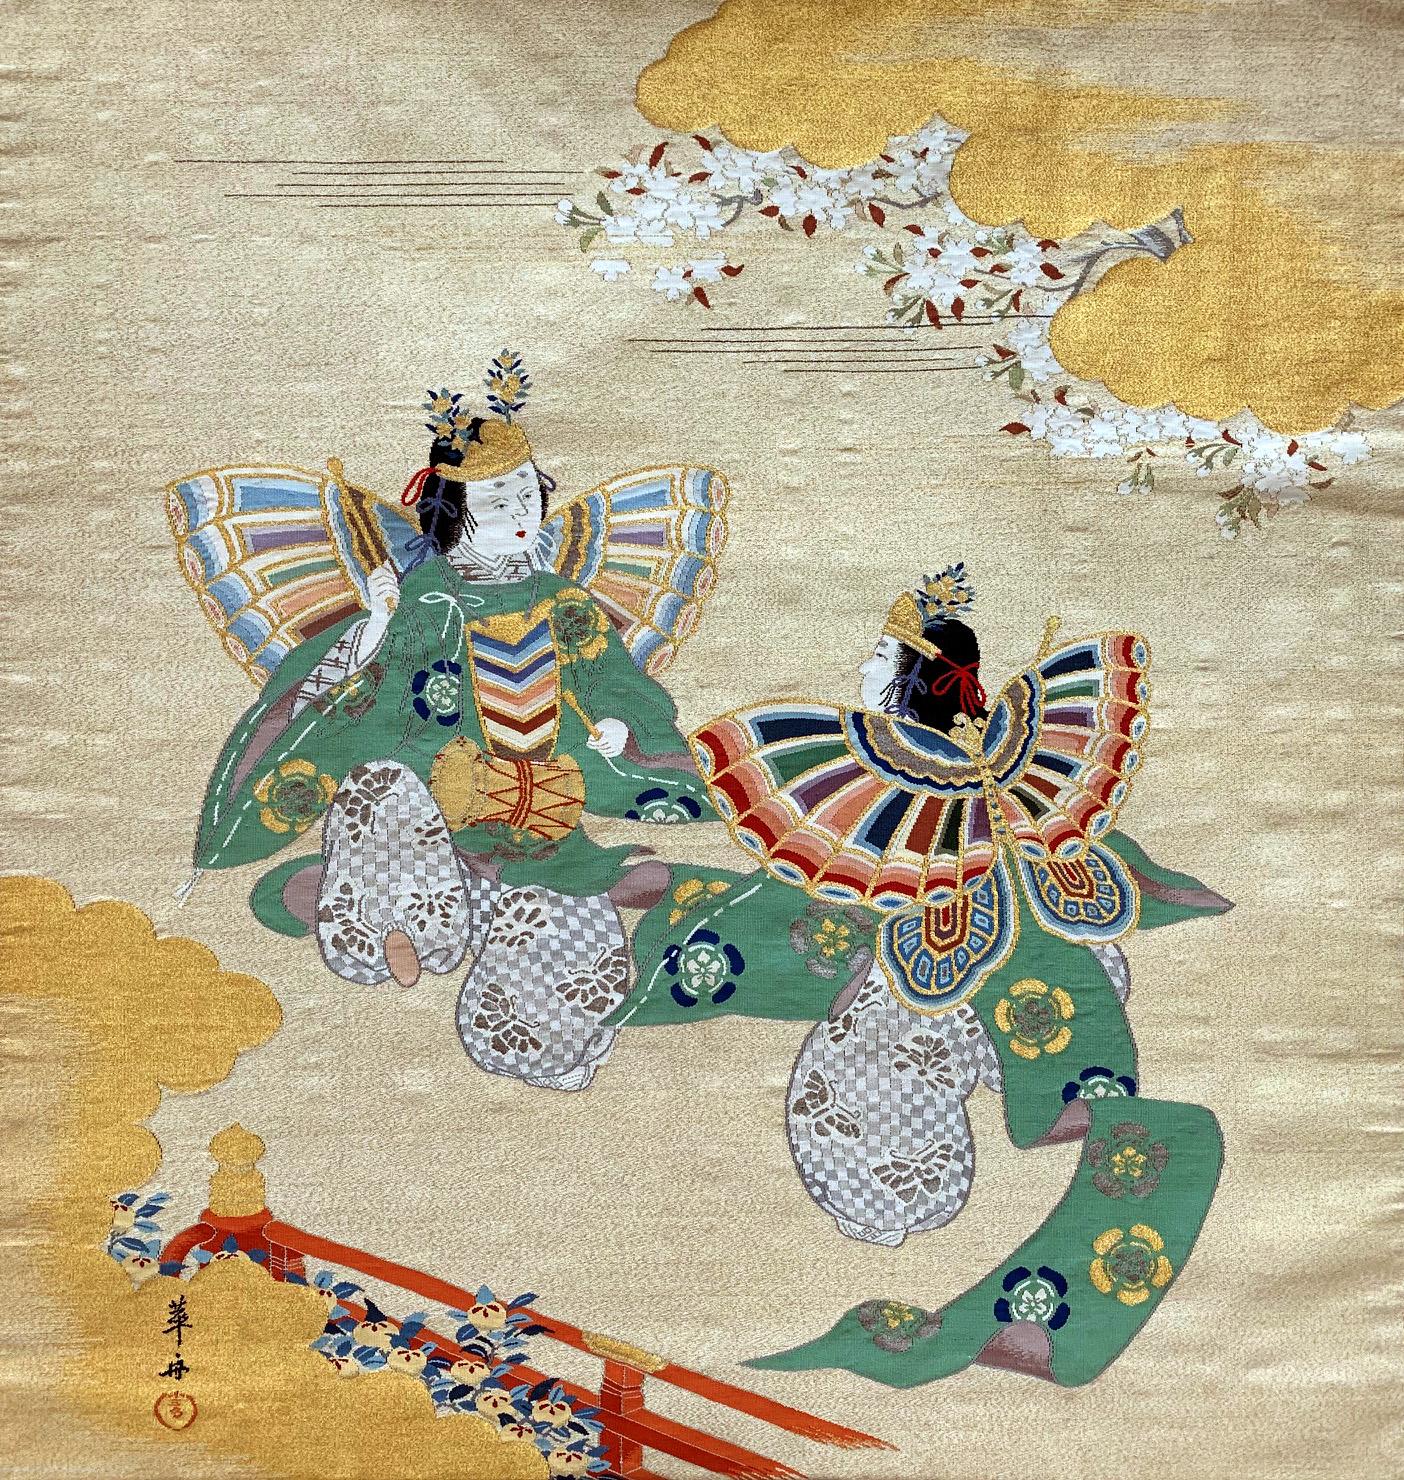 A Japanese Fukusa textile panel circa late 19th-early 20th century of Meiji Period. On the woven brocade background with gold thread forming clouds and mist, the main composition showcases two butterfly dancers in embroidery with great details and